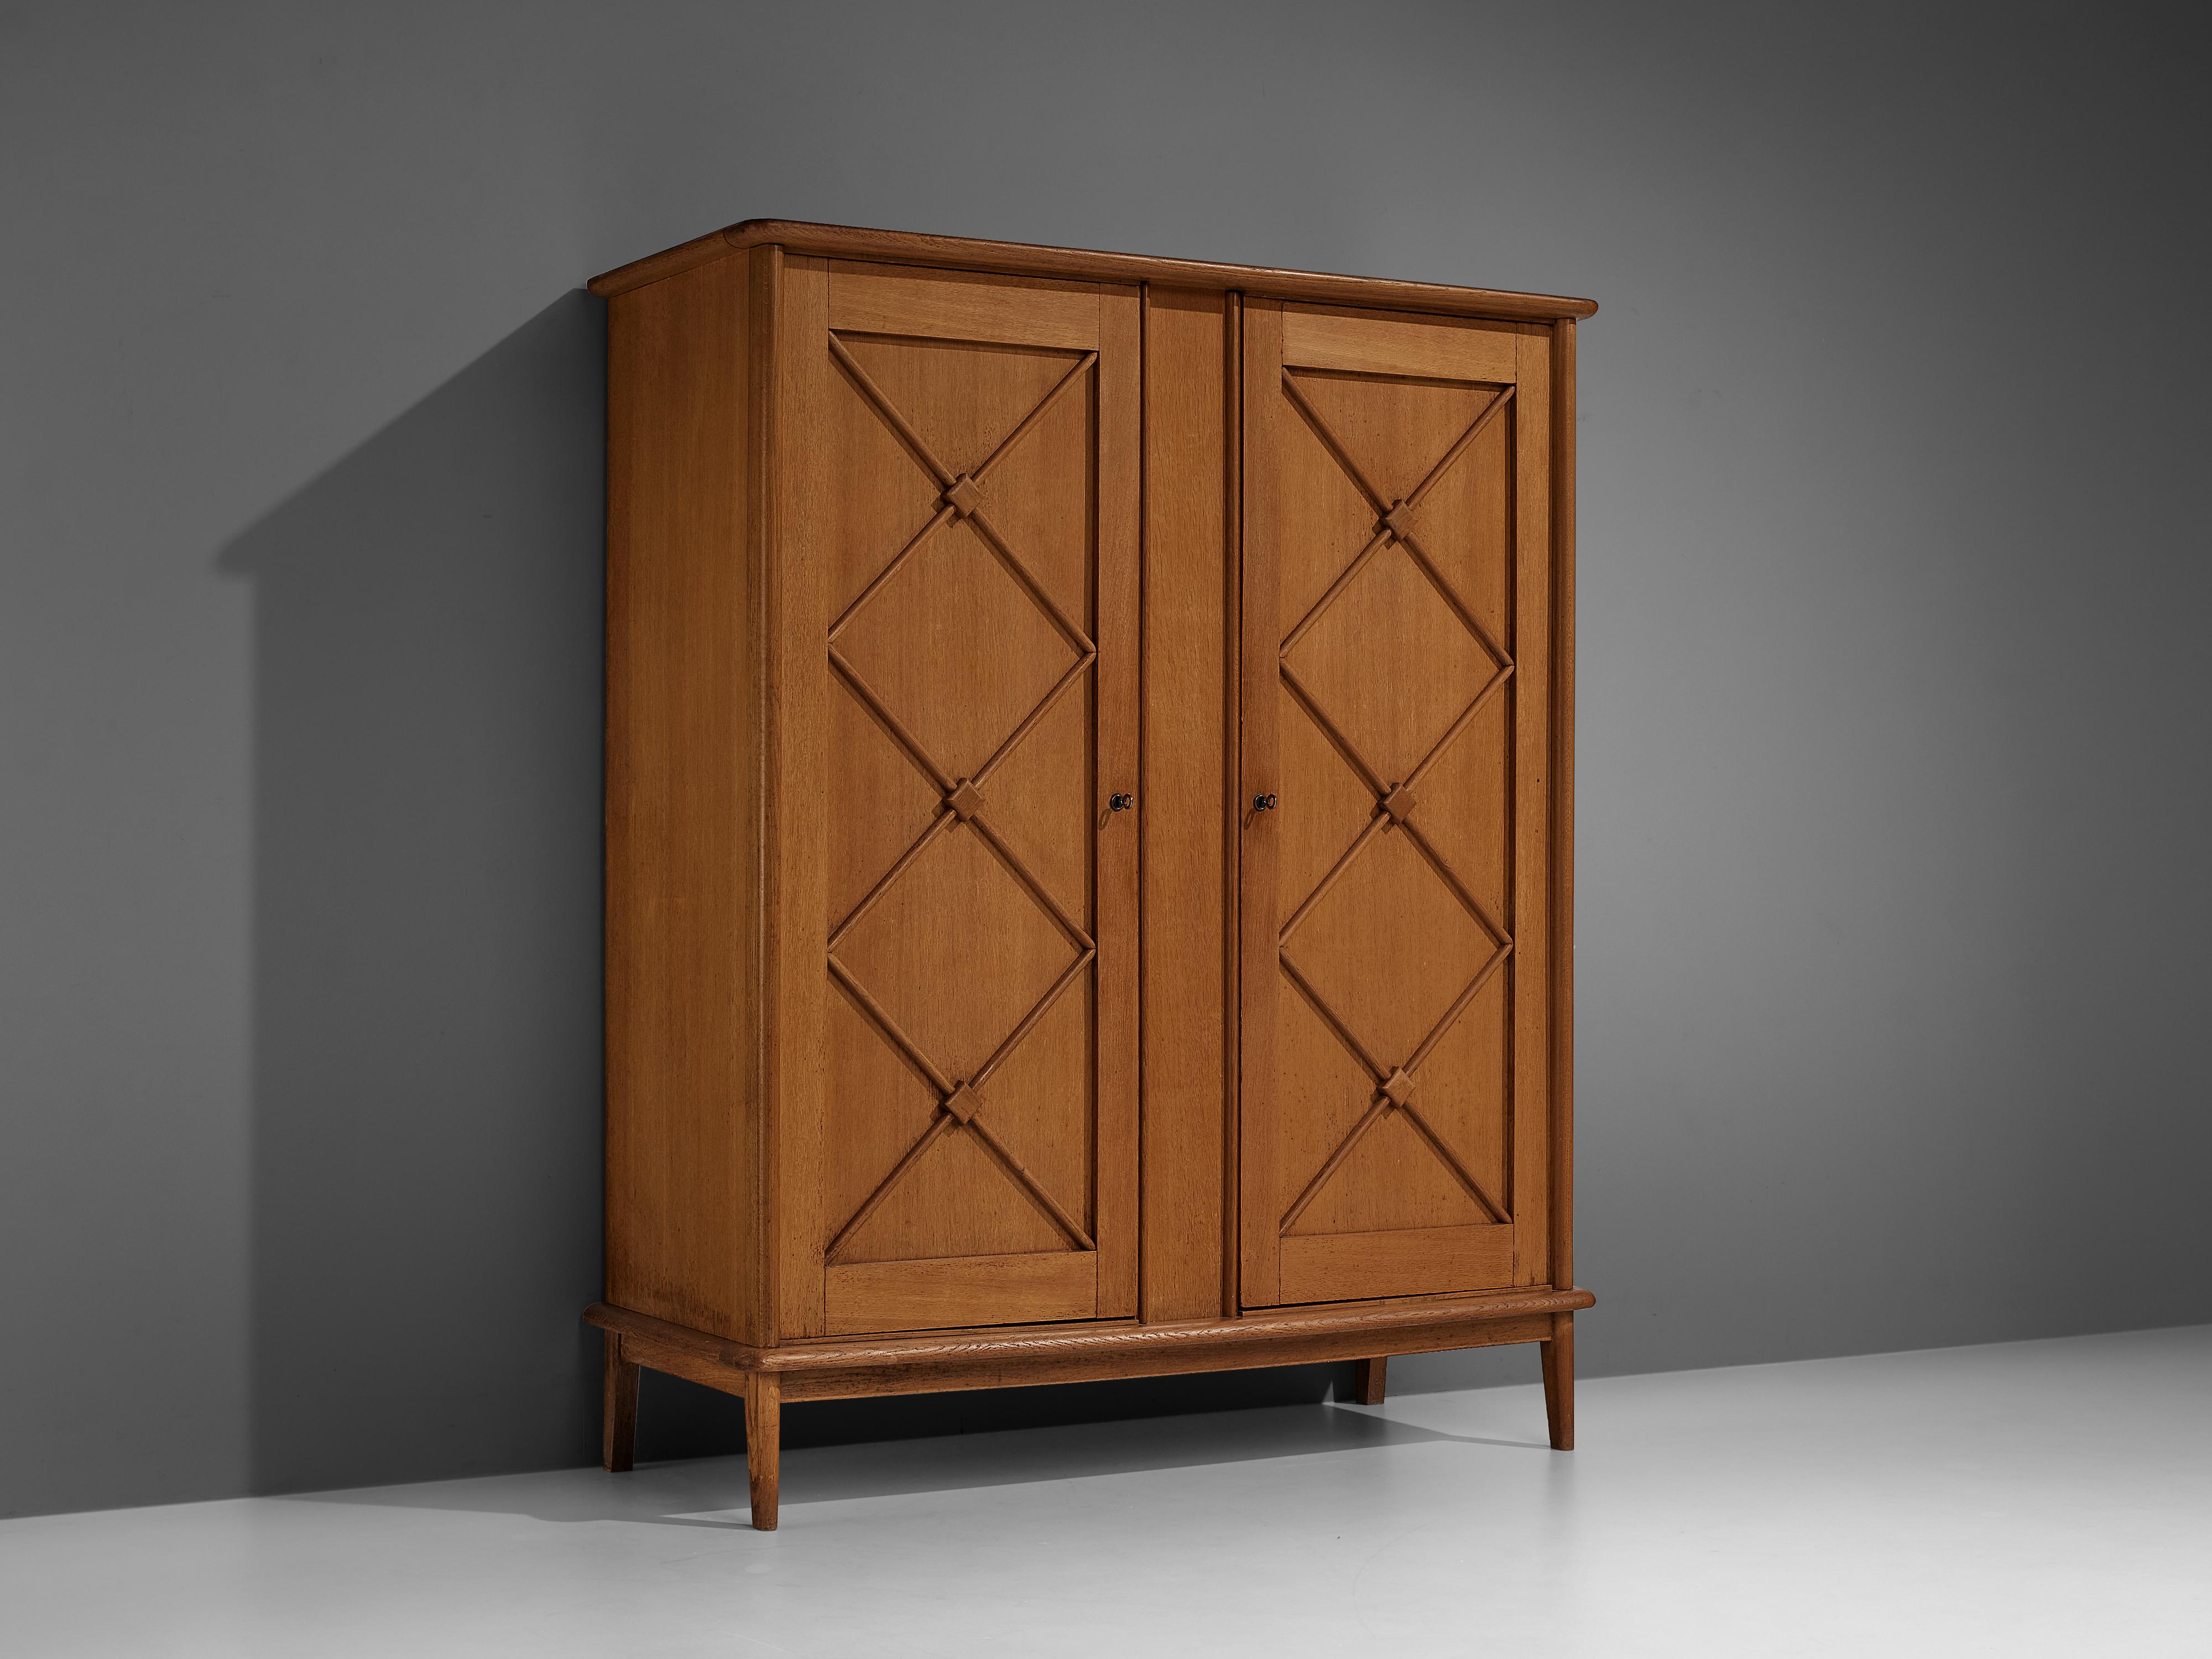 wardrobe, oak, France, 1960s

An elegant armoire in oak that embodies geometrical shapes that specialize the design and highlight the admirable craftsmanship. The corpus is lifted from the ground by slim, conical legs that give the solid looking